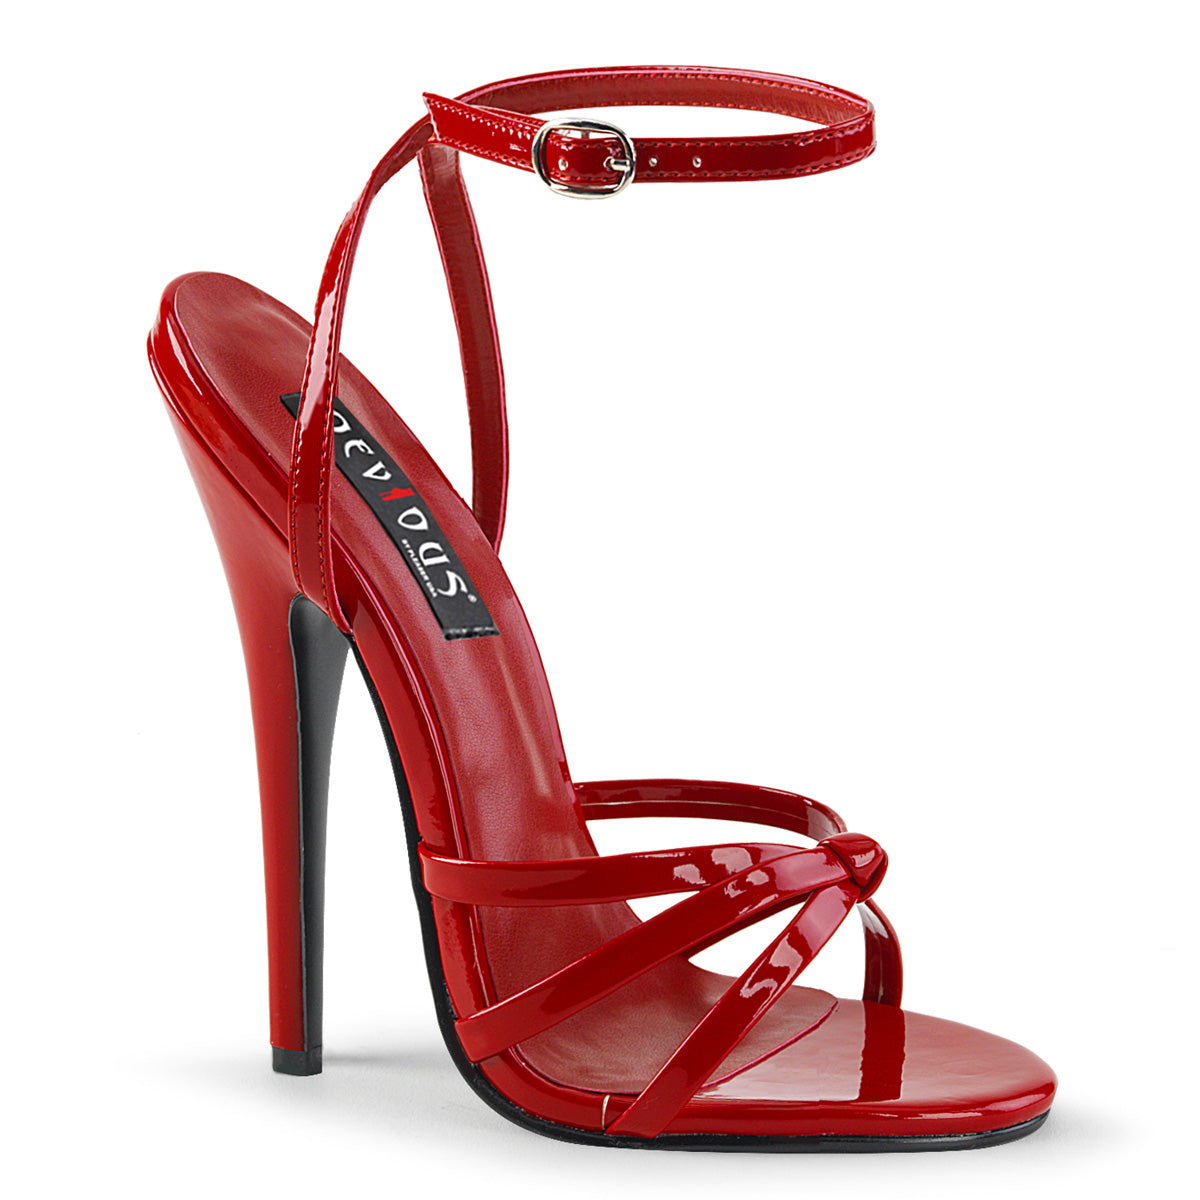 DOMINA-108 Red Patent Ankle High Heel  Multi view 1